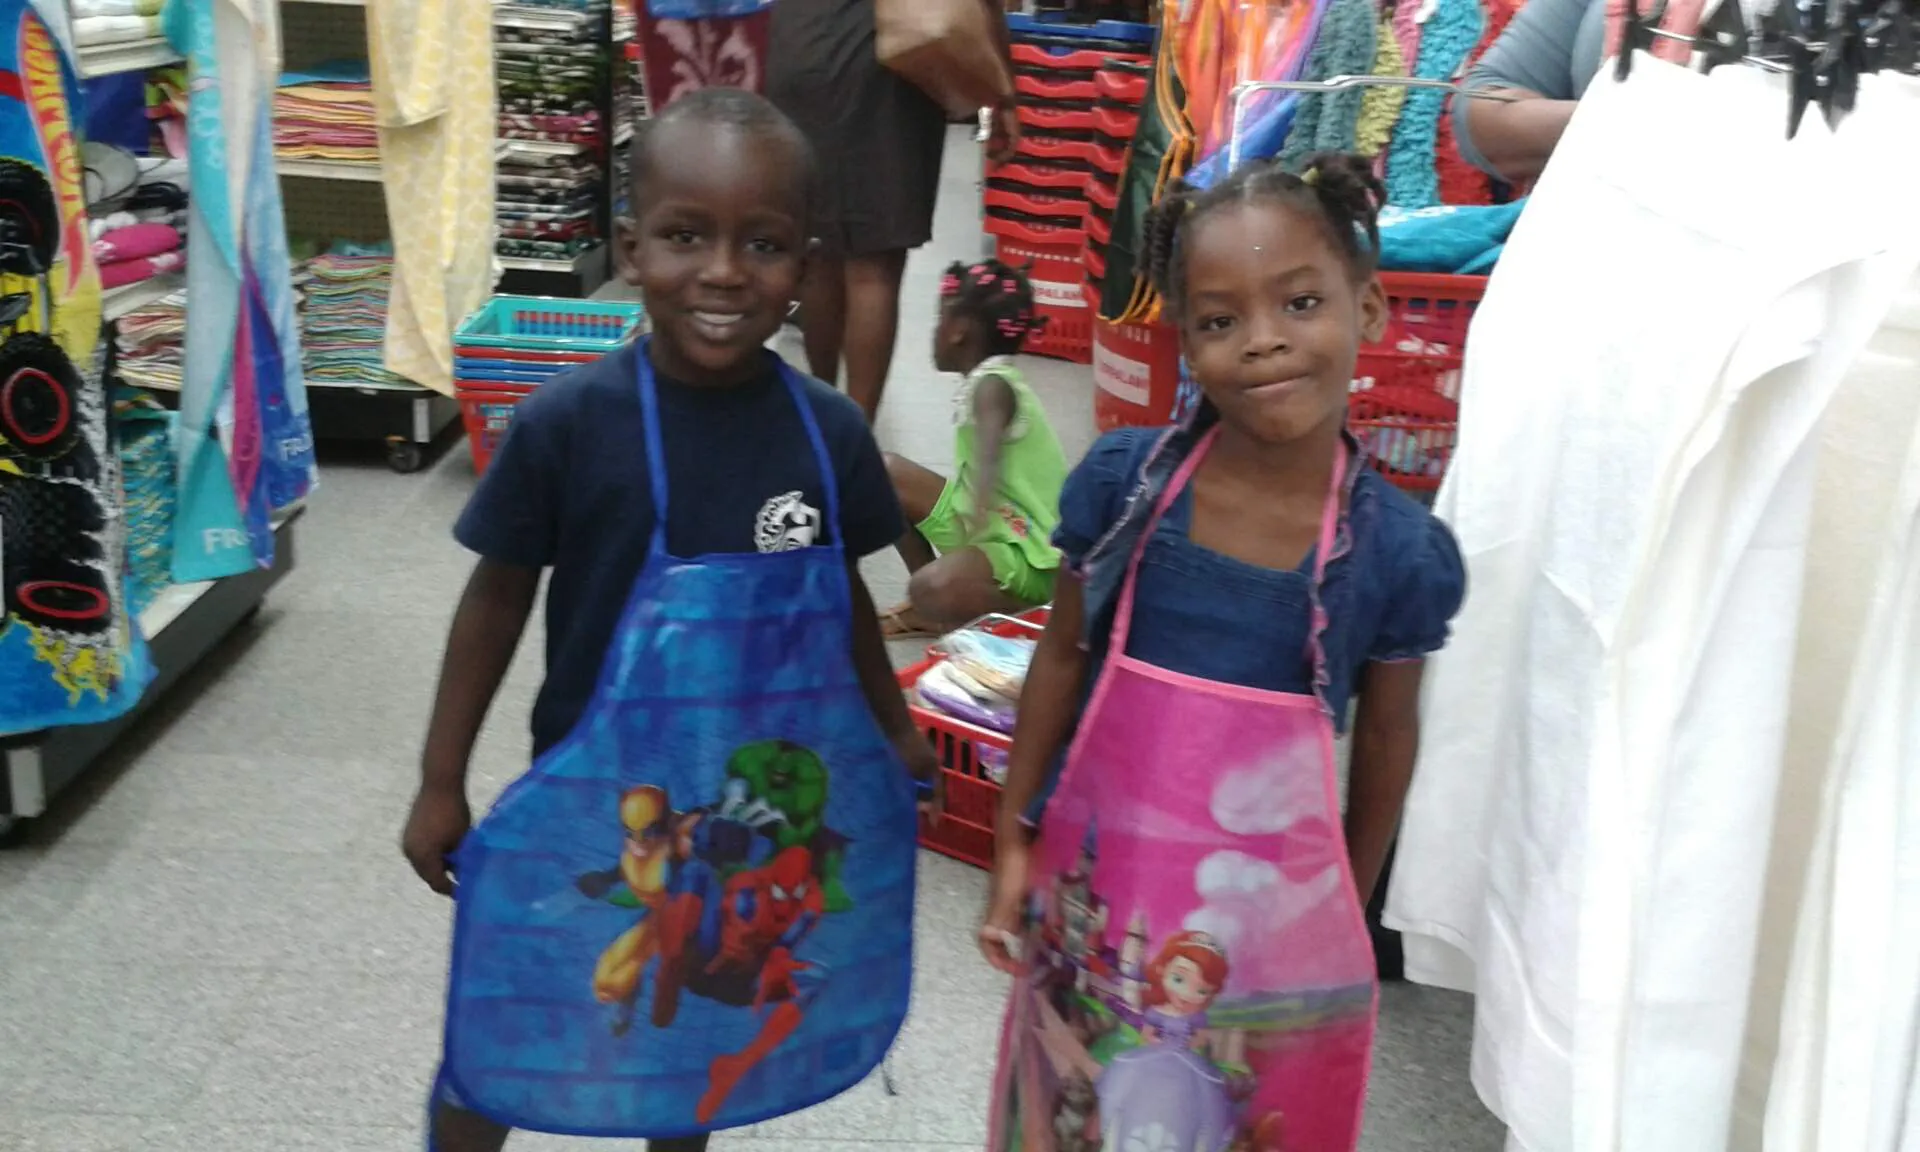 kids in aprons